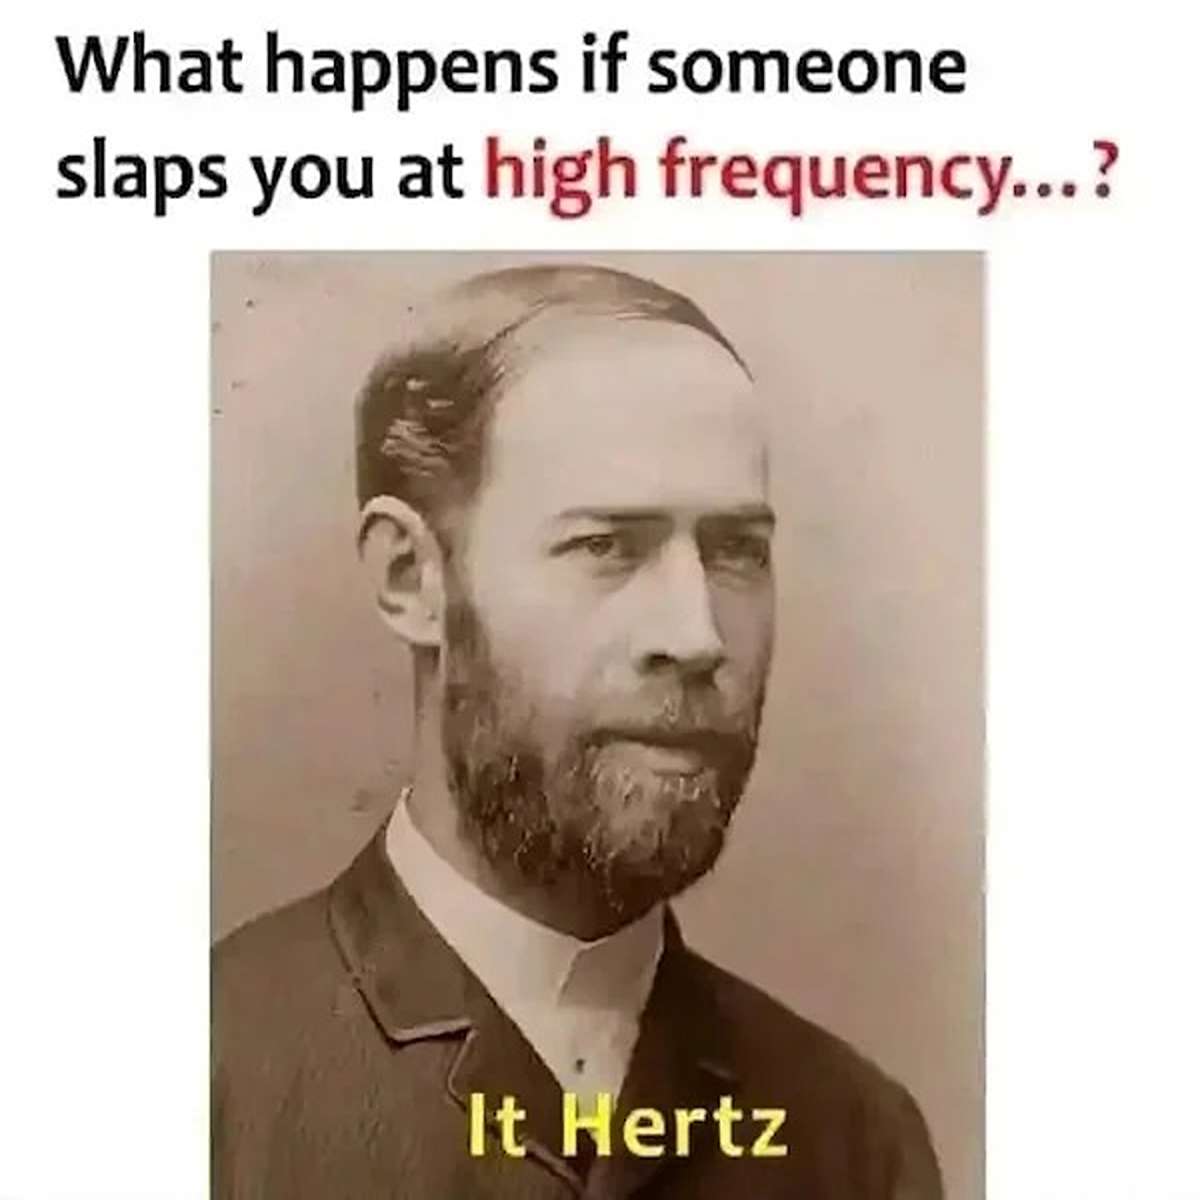 dank memes --  What happens if someone slaps you at high frequency...? It Hertz